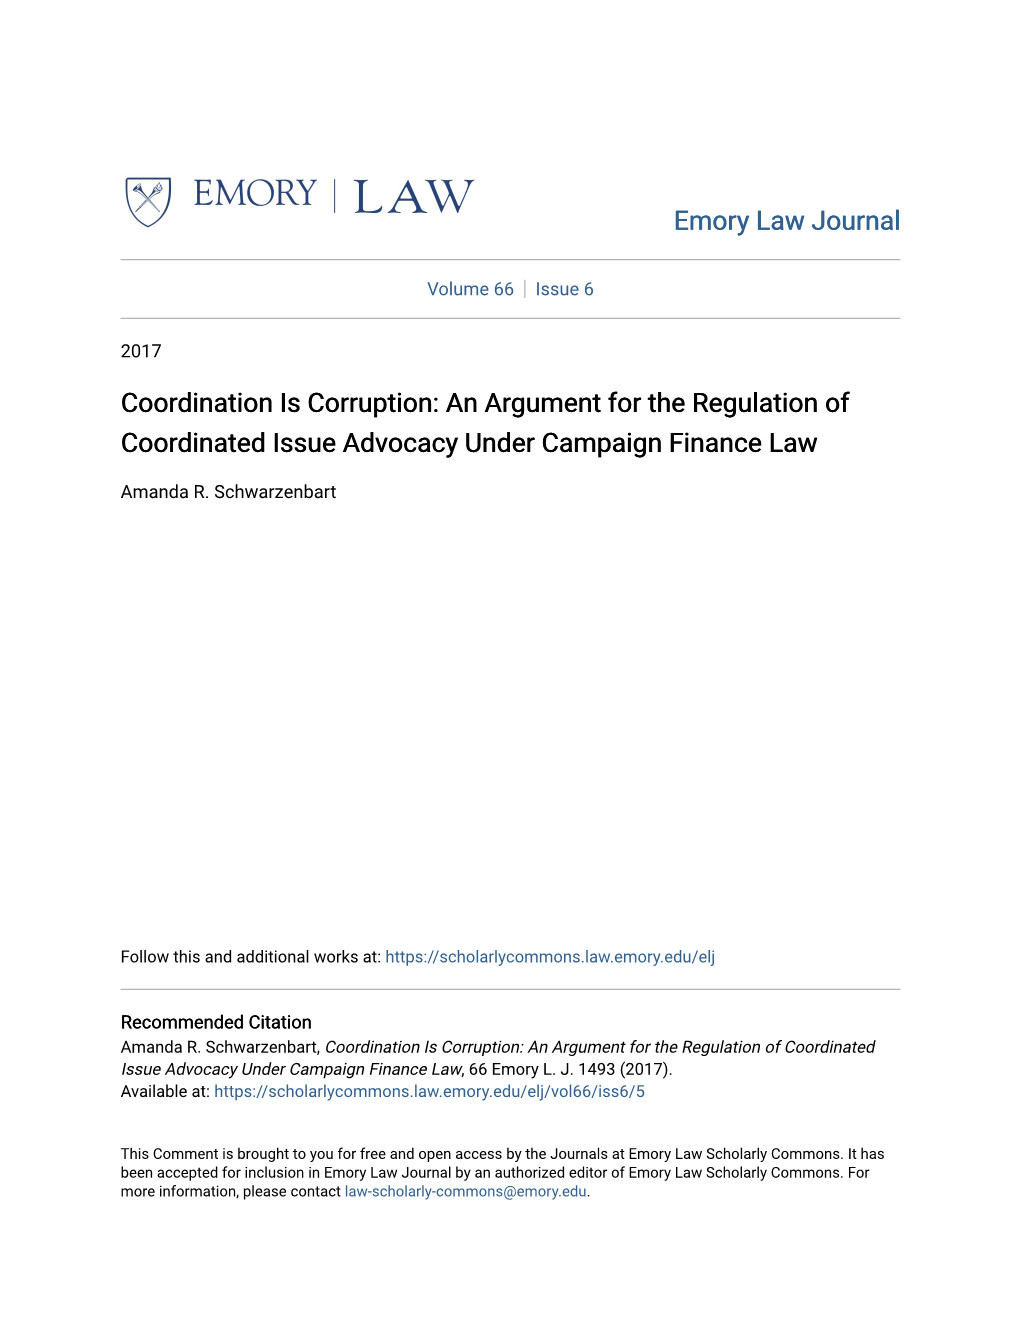 Coordination Is Corruption: an Argument for the Regulation of Coordinated Issue Advocacy Under Campaign Finance Law